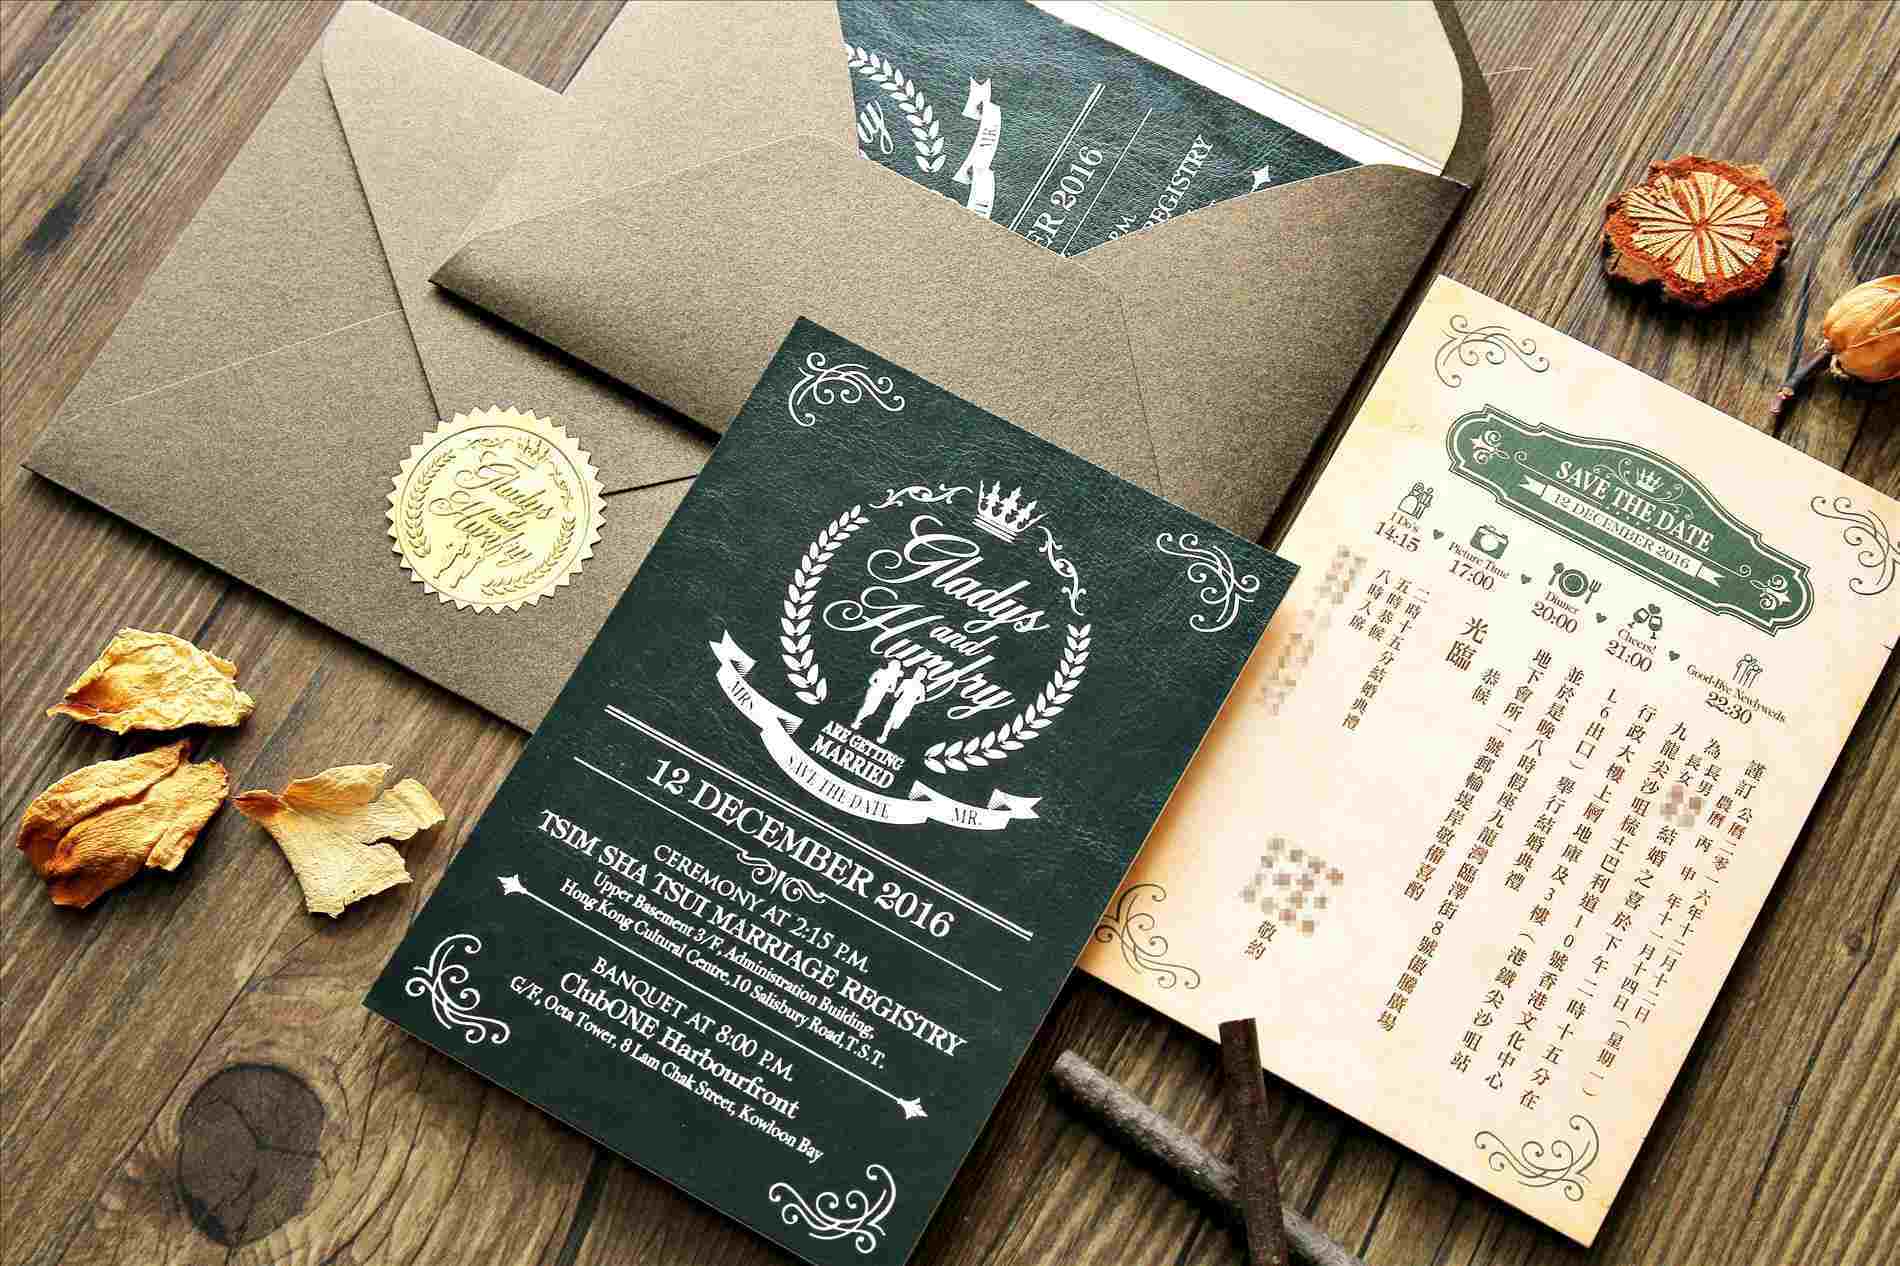 Necessity of printing services to make an invitation